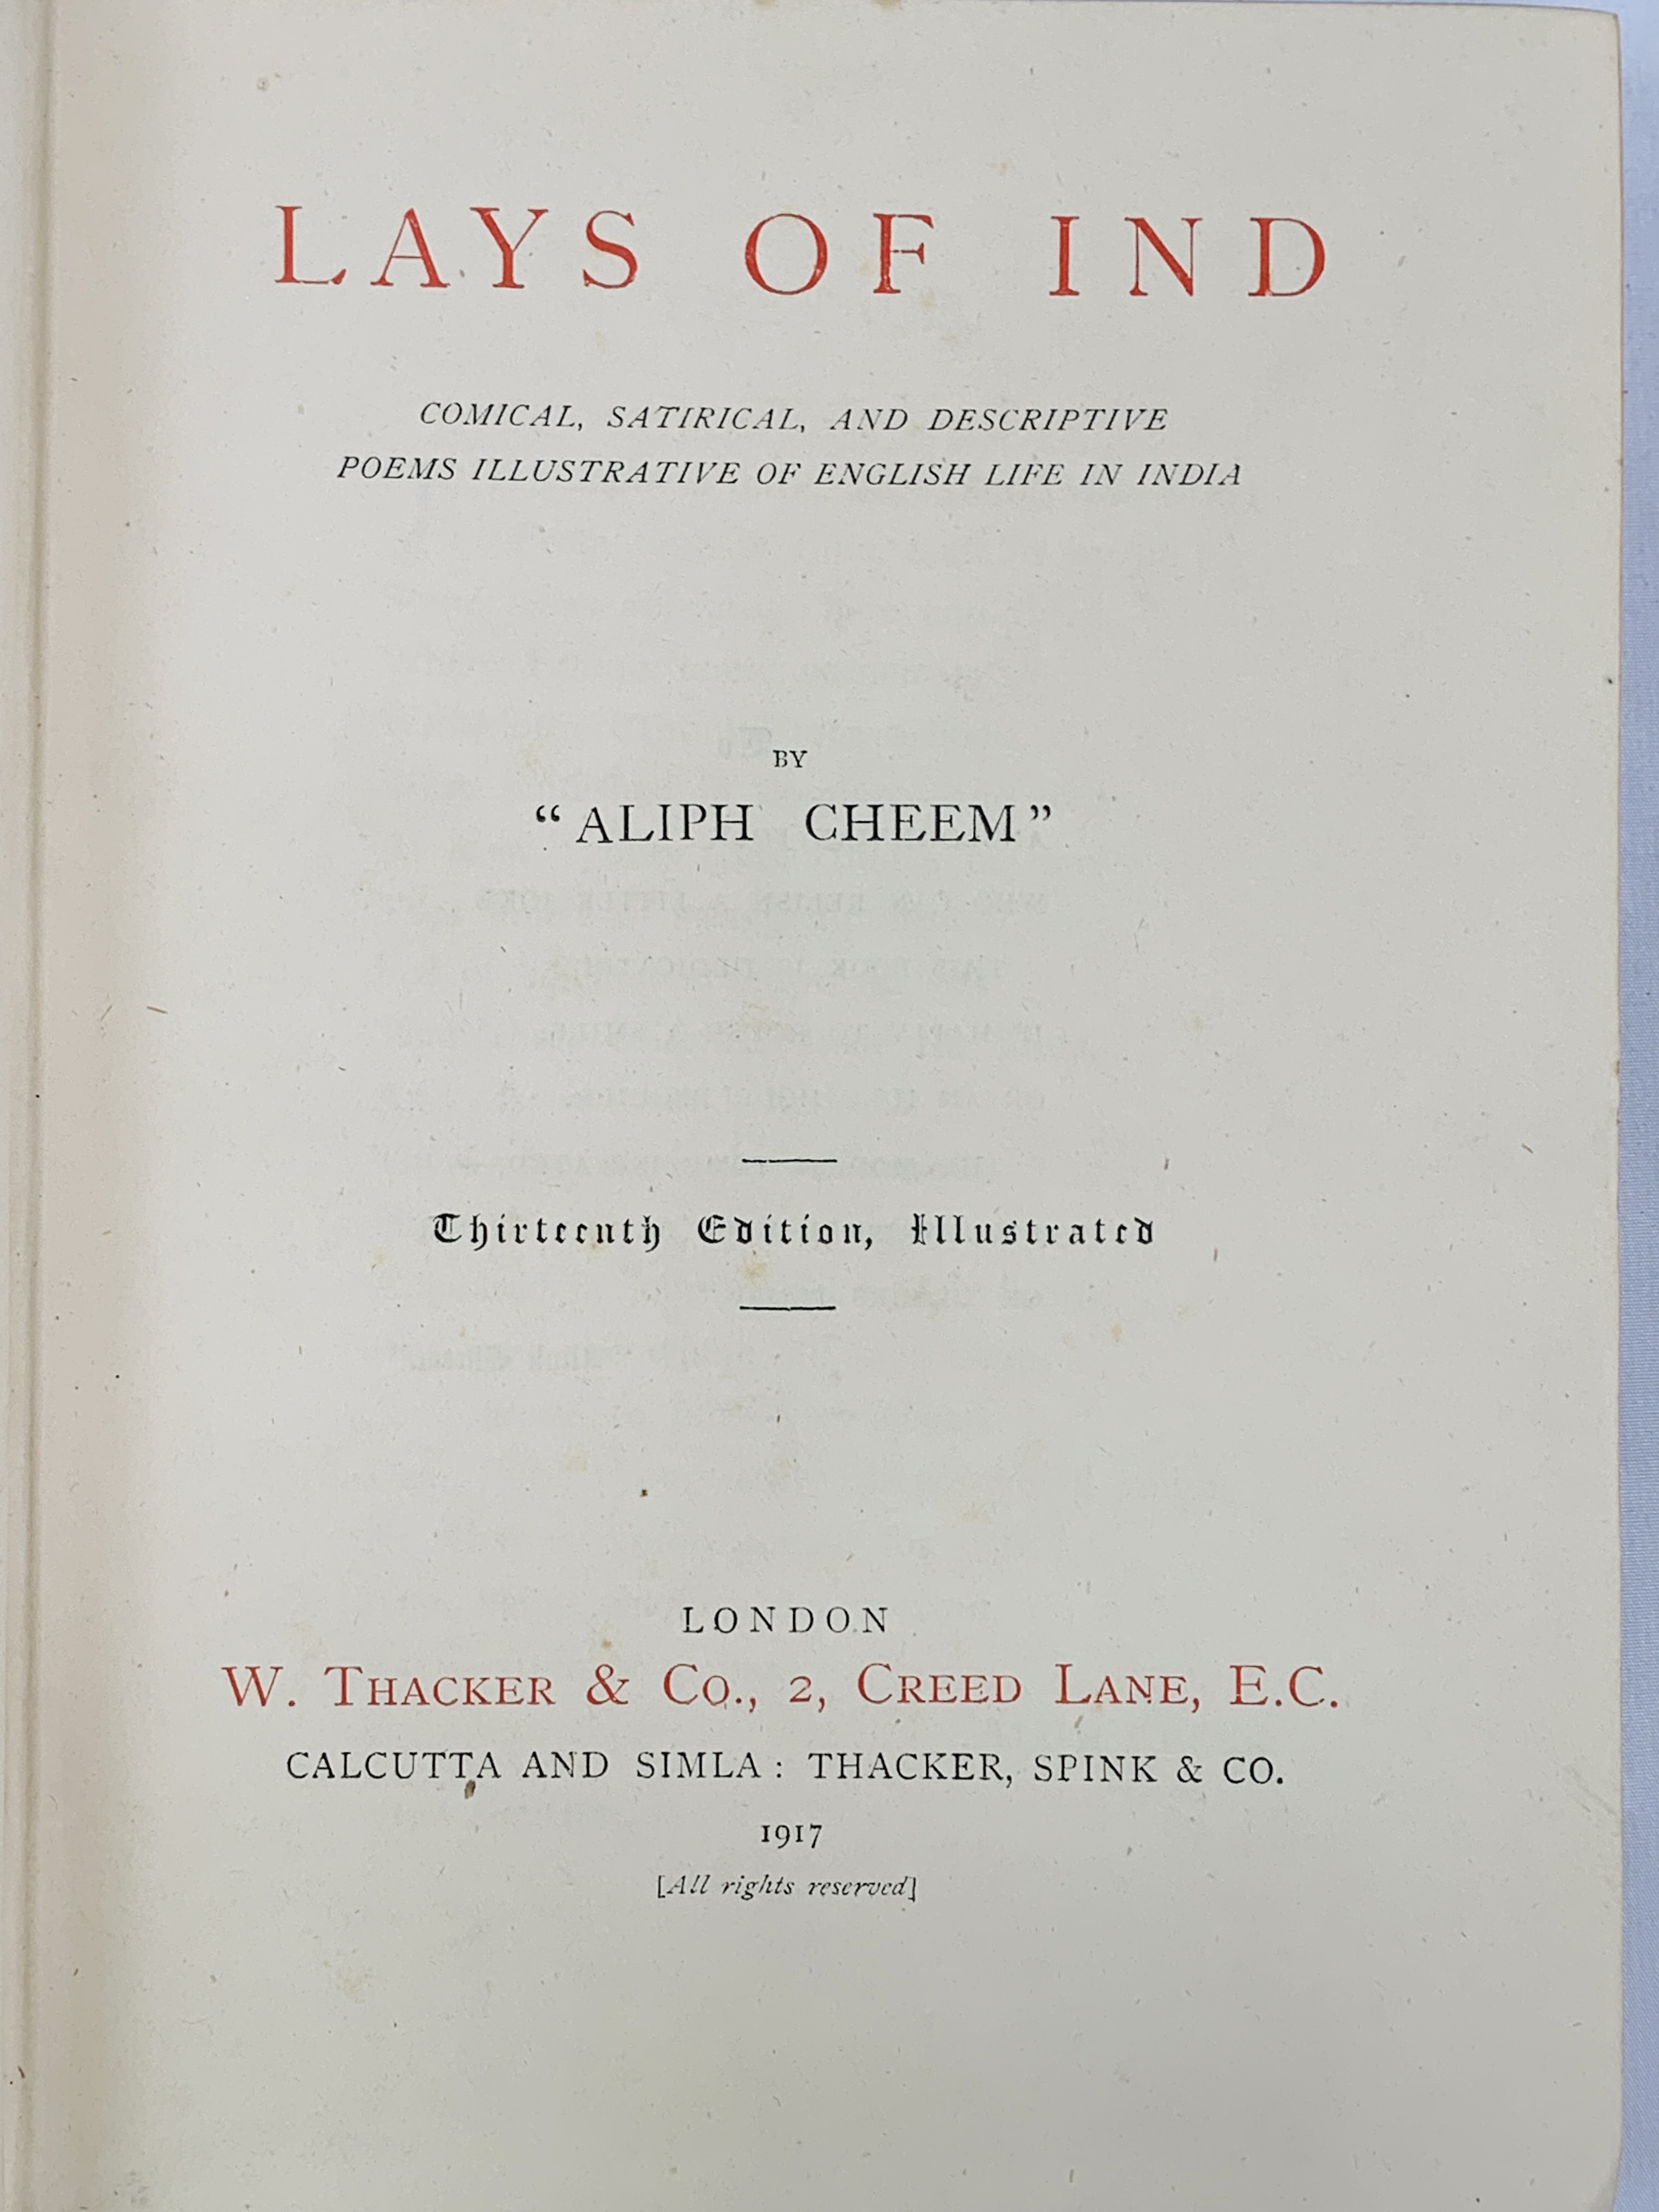 Lays of Ind by "Aliph Cheem" published 1917; together with the Book of Snobs by William Thackeray - Image 4 of 4